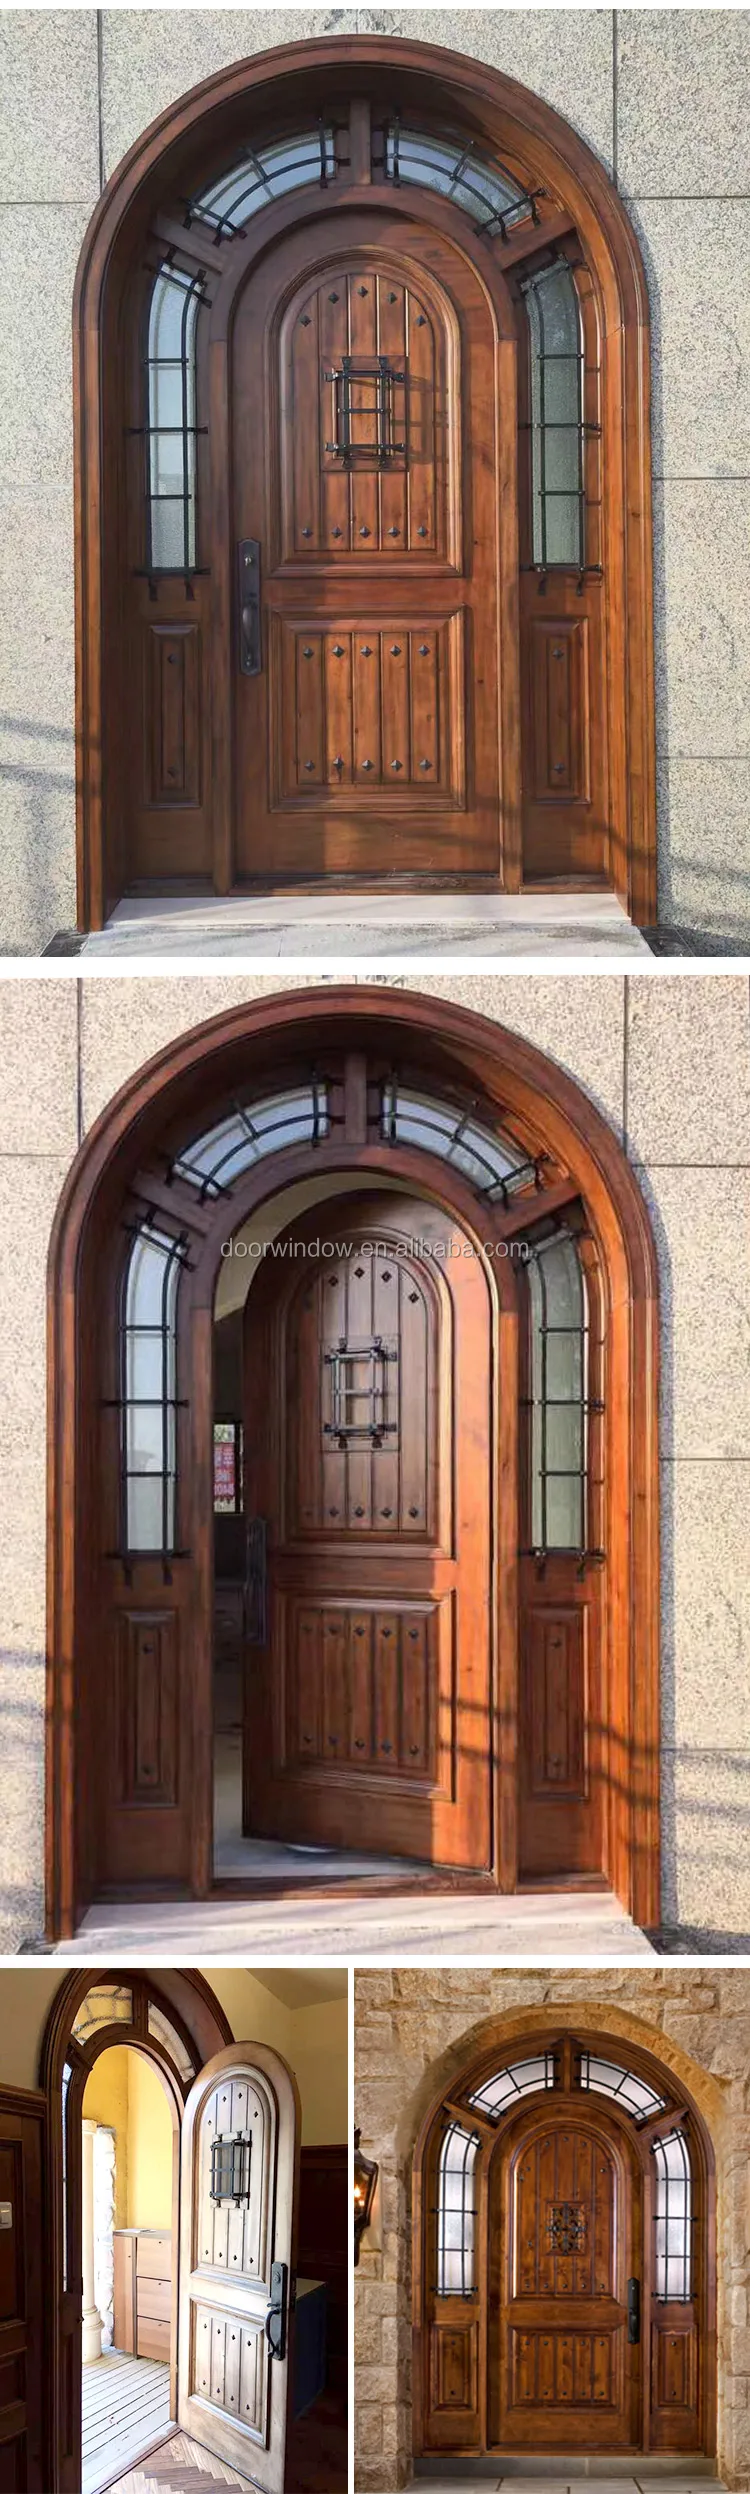 Americaentry door with side lite carved arched top double french front doors with transom side lite frosted glass